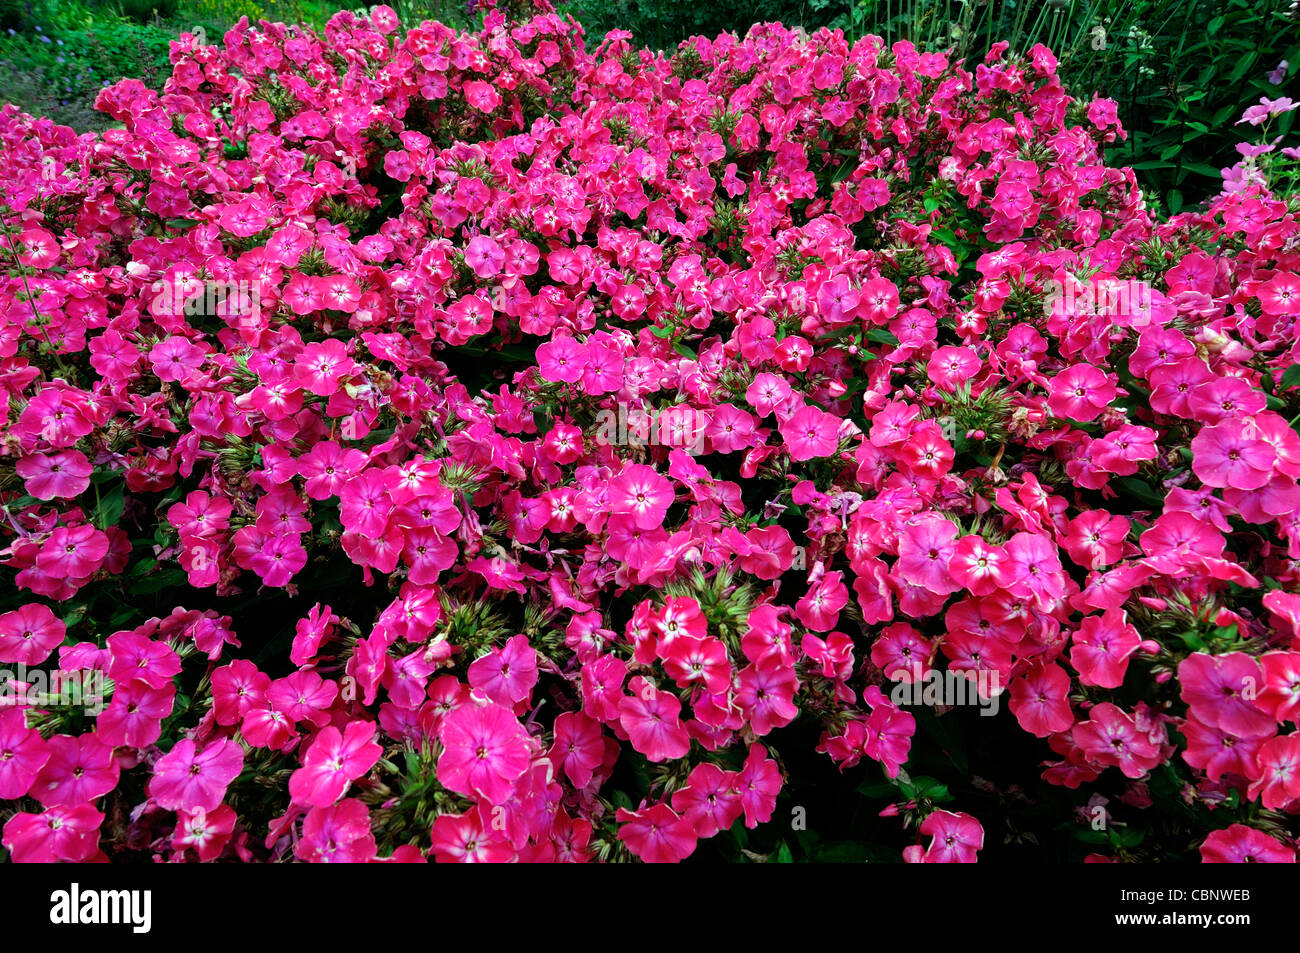 pink phlox paniculata perennial herbaceous plant flowers blooms blossoms Stock Photo